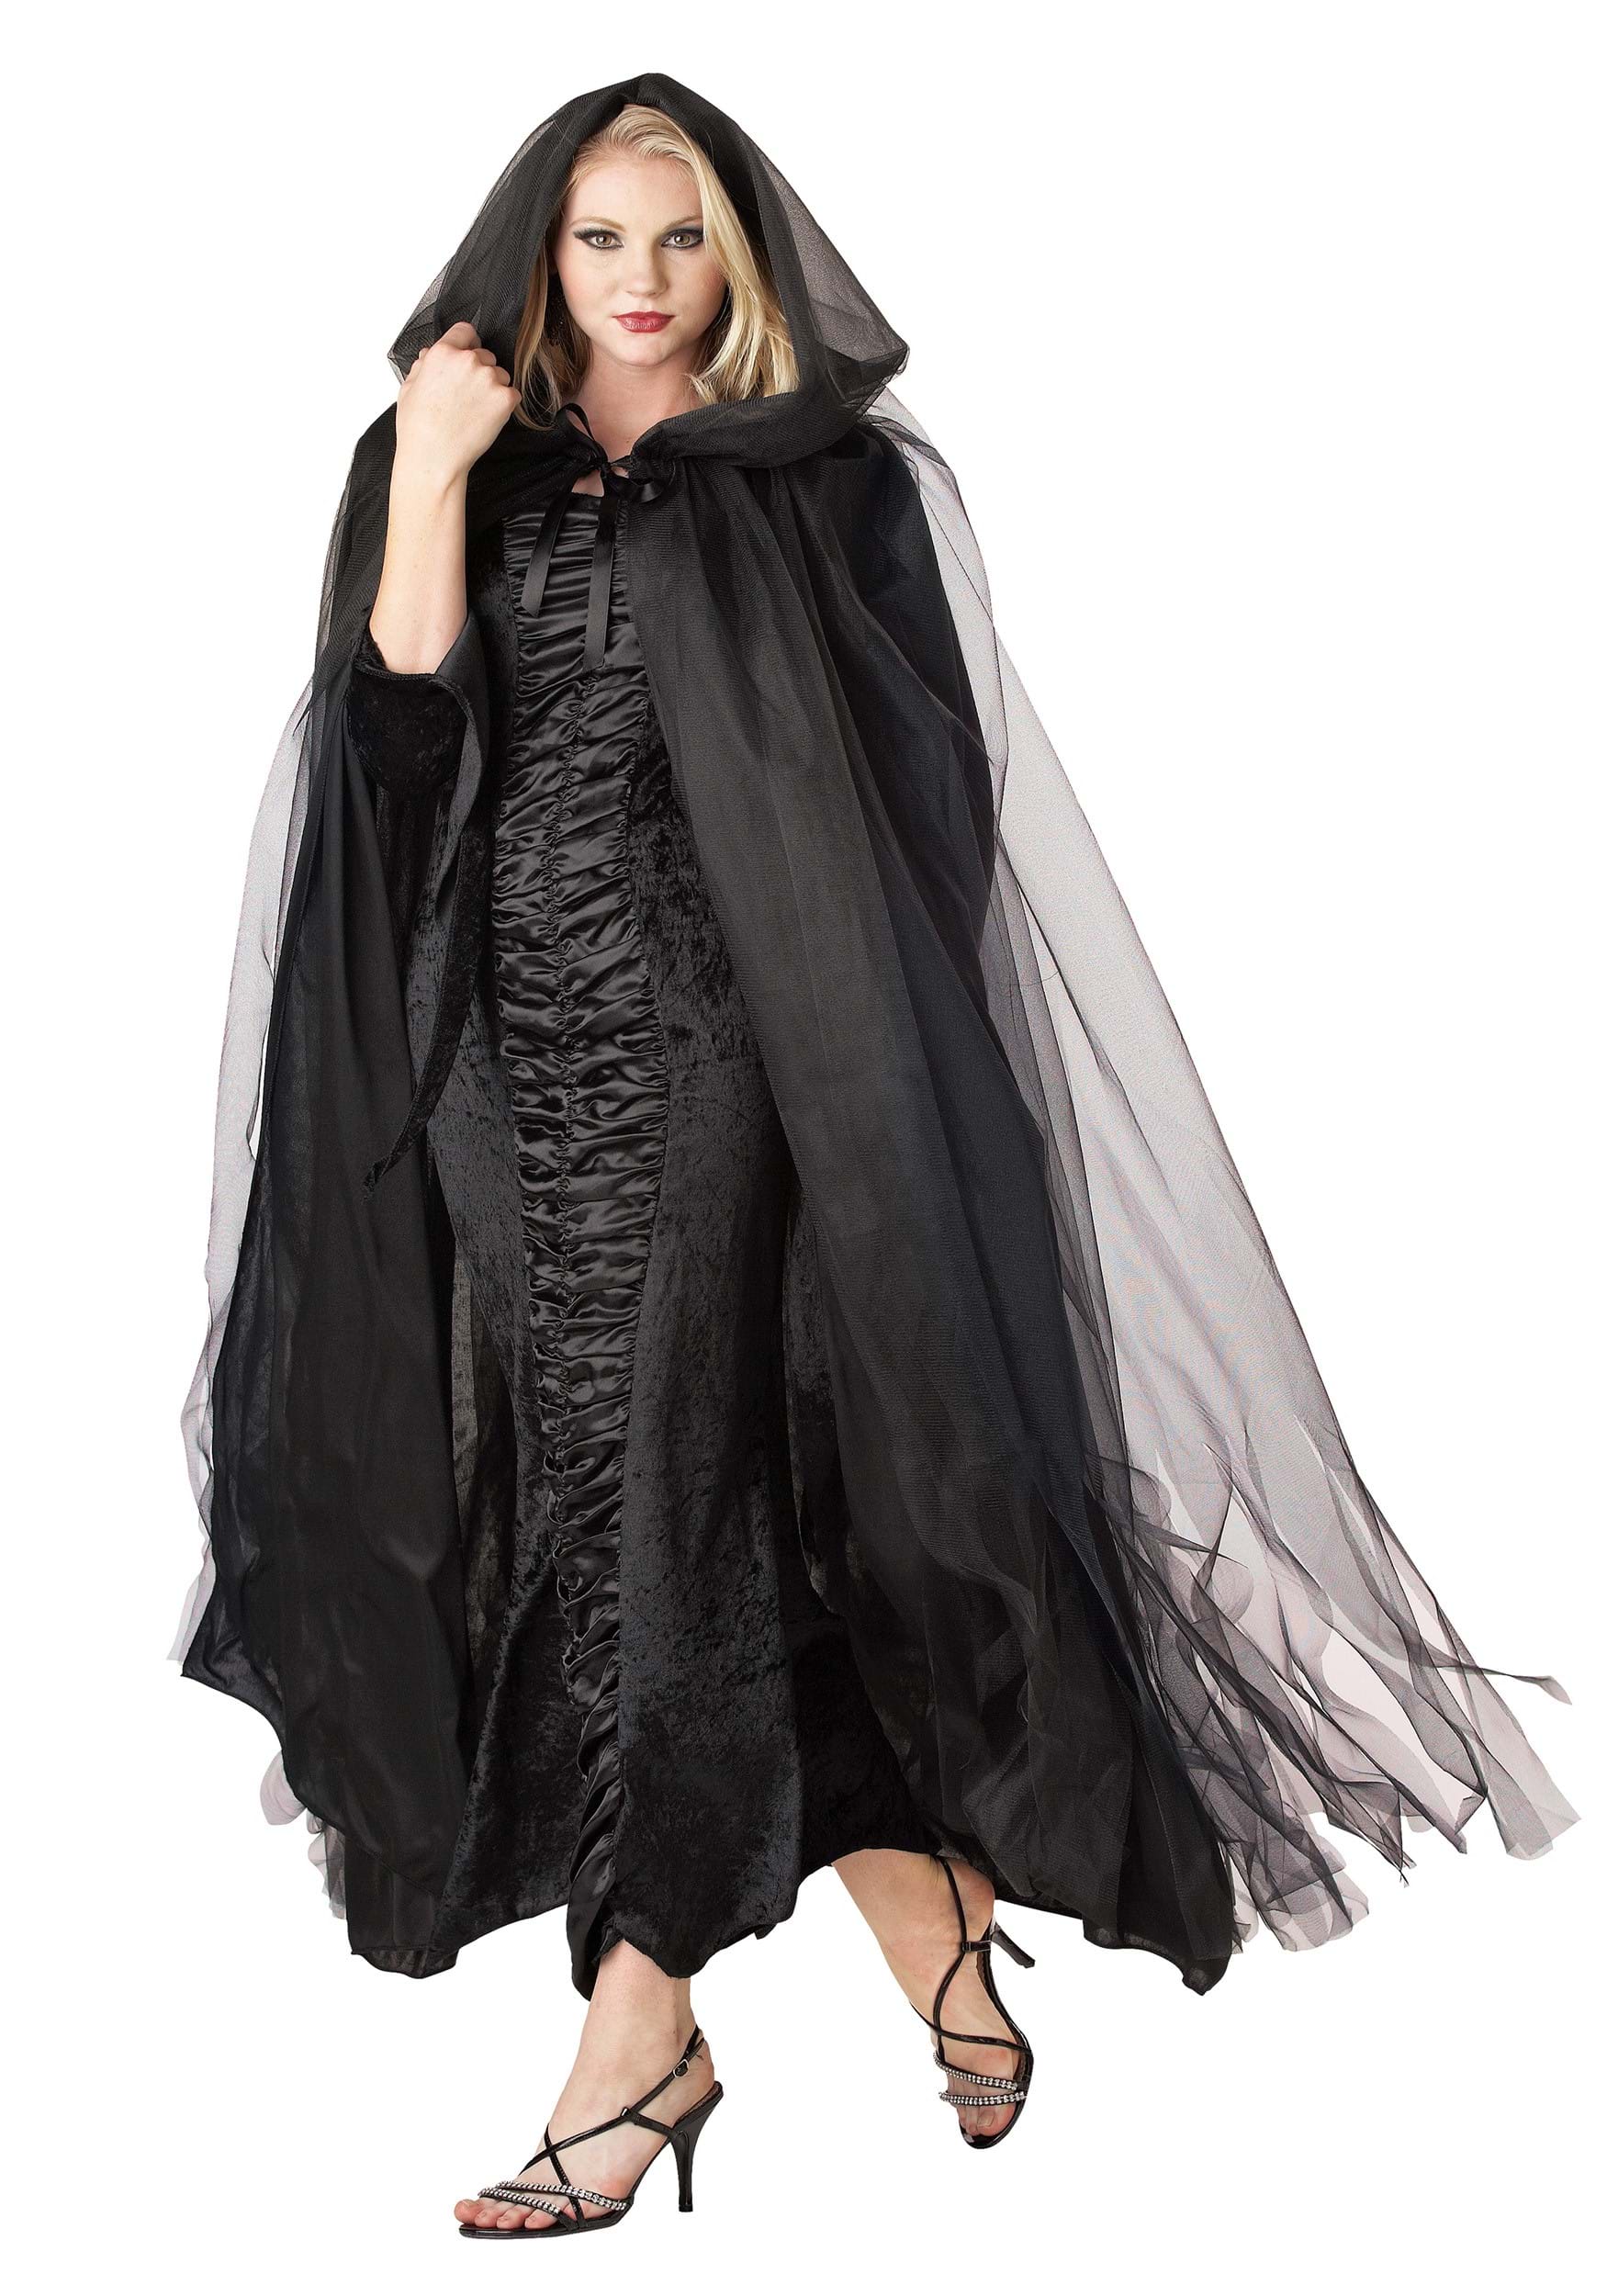 Midnight Black Cape For Adults , Costume Capes